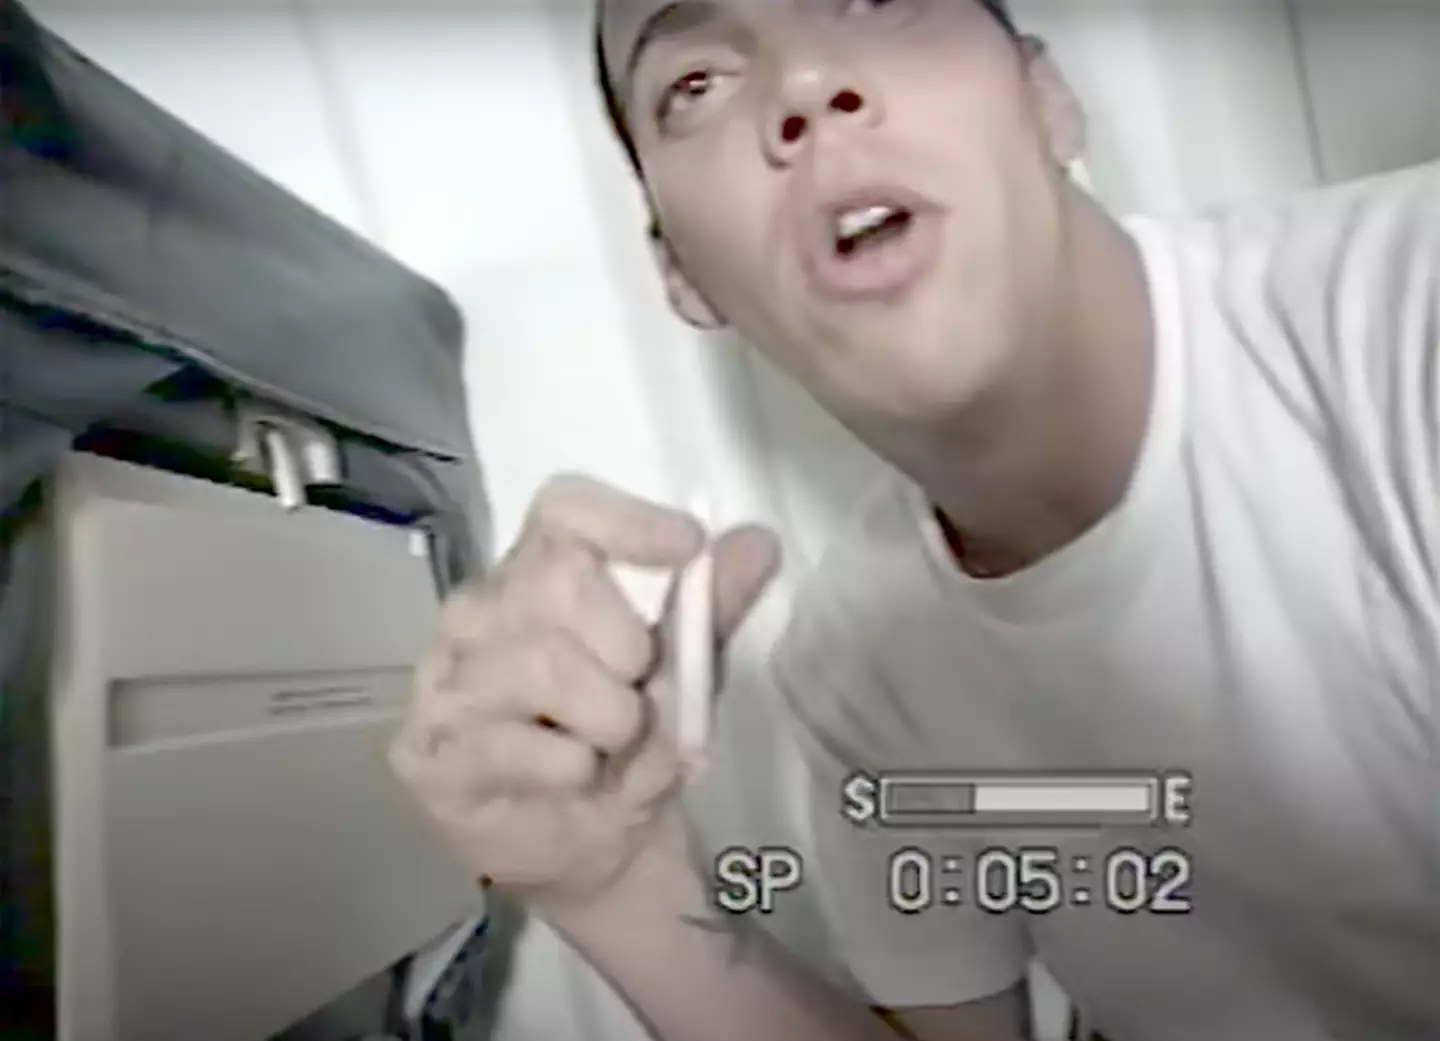 Steve-O lit a cigarette on a Delta flight and was caught.